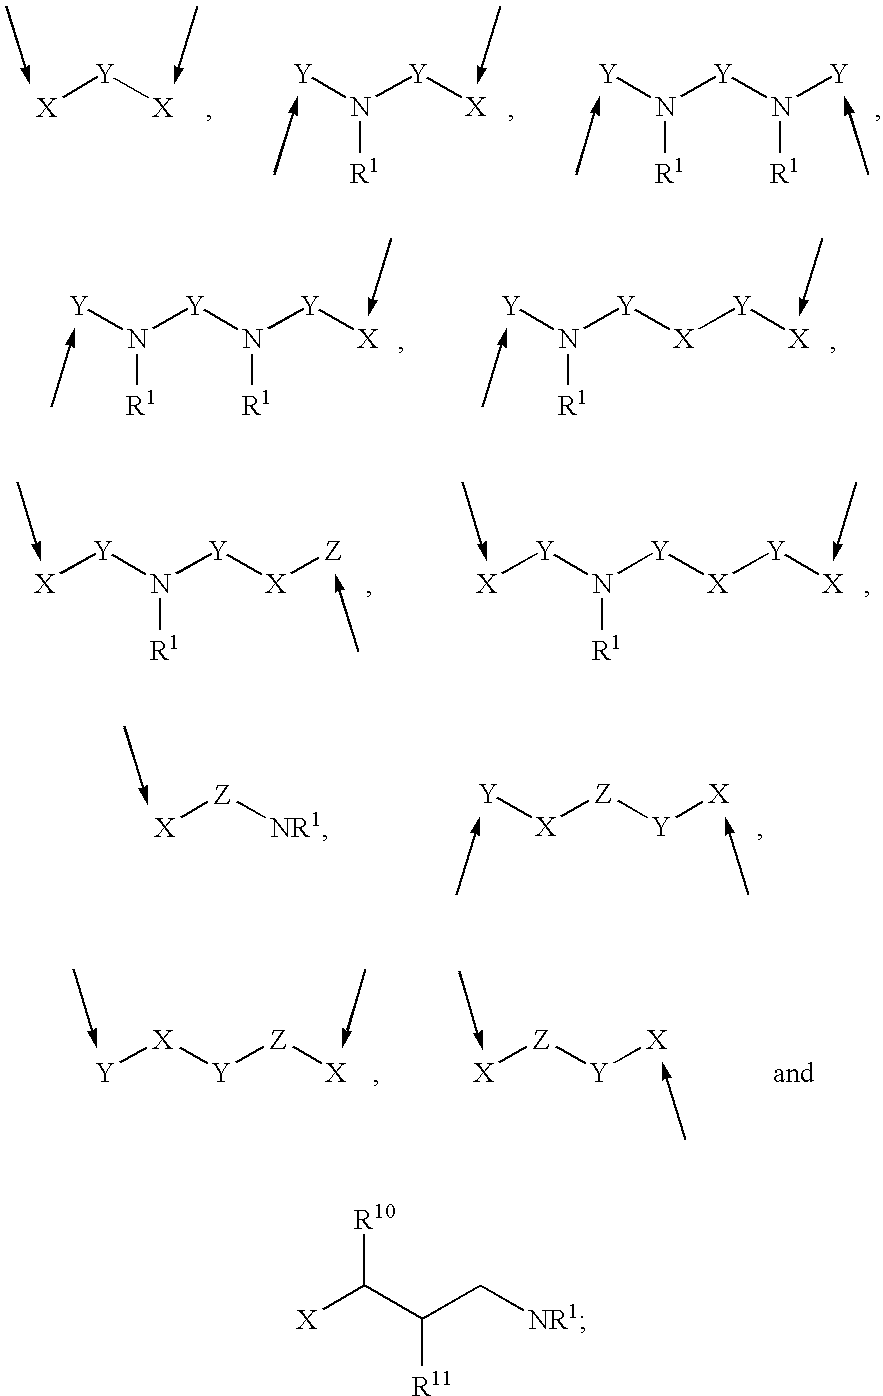 Prodrugs containing novel bio-cleavable linkers